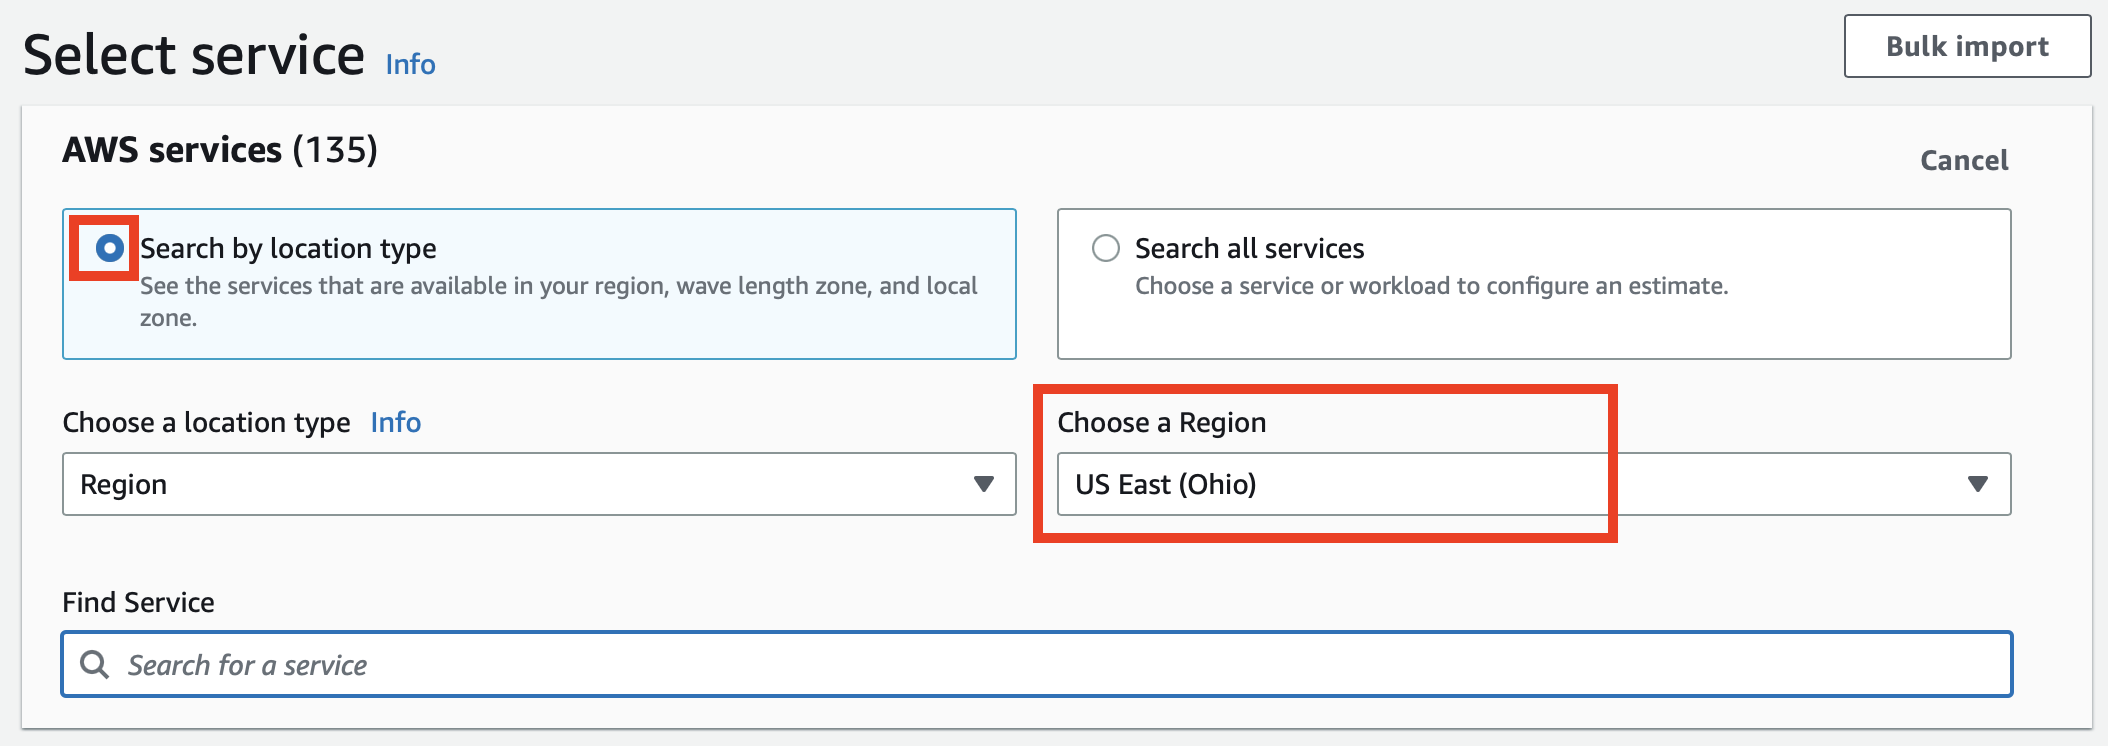 Step One - Select AWS Region by Location